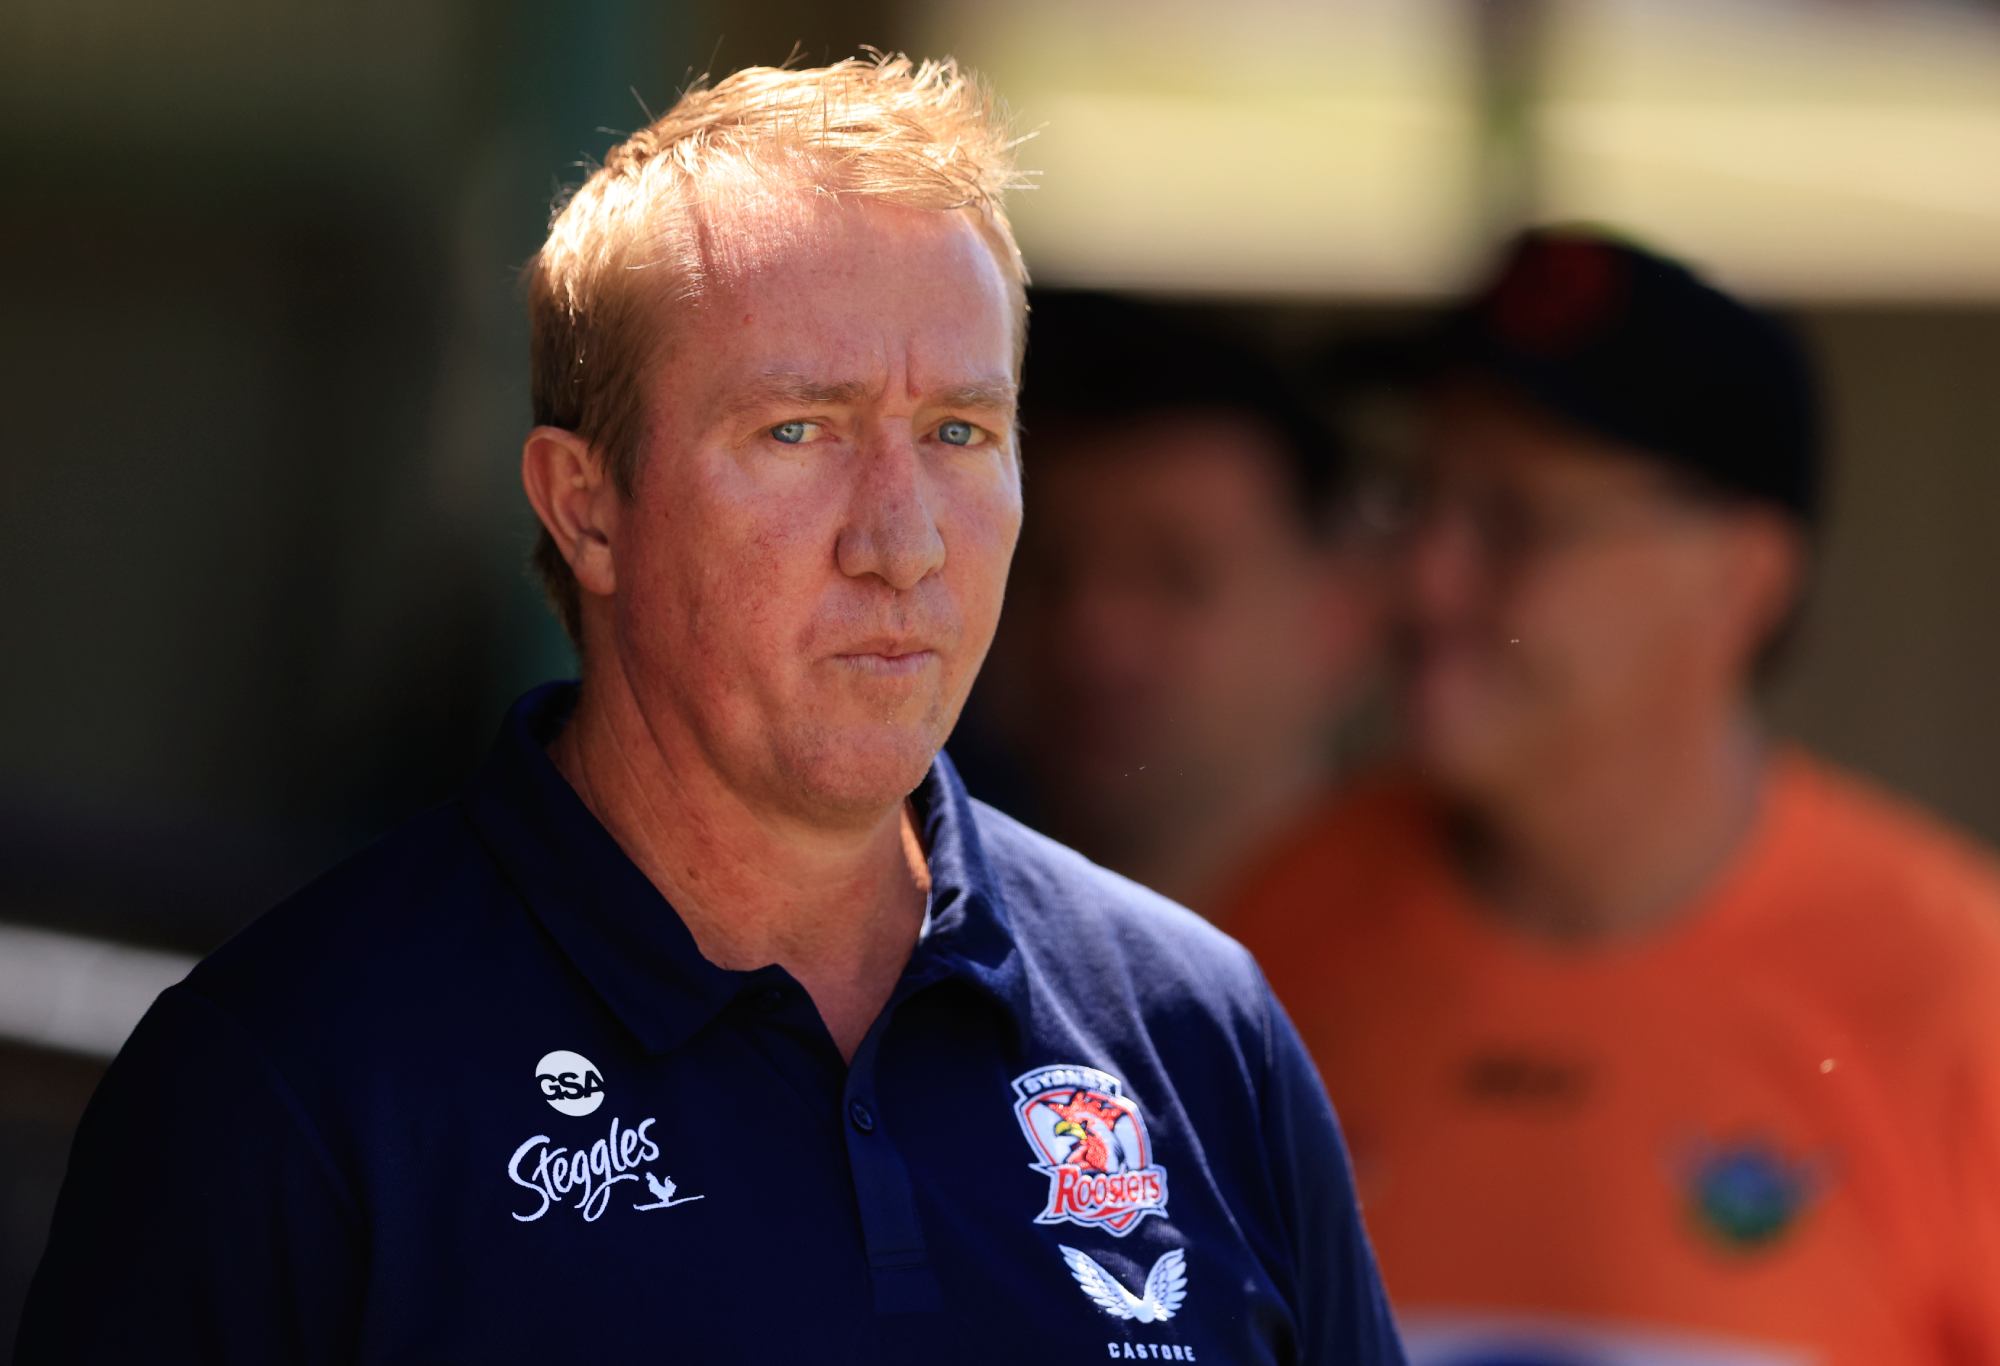 QUEANBEYAN, AUSTRALIA - FEBRUARY 27: Trent Robinson looks on during the NSW Cup Trial Match between the North Sydney Bears and the Canberra Raiders at Seiffert Oval on February 27, 2021 in Queanbeyan, Australia. (Photo by Mark Evans/Getty Images)